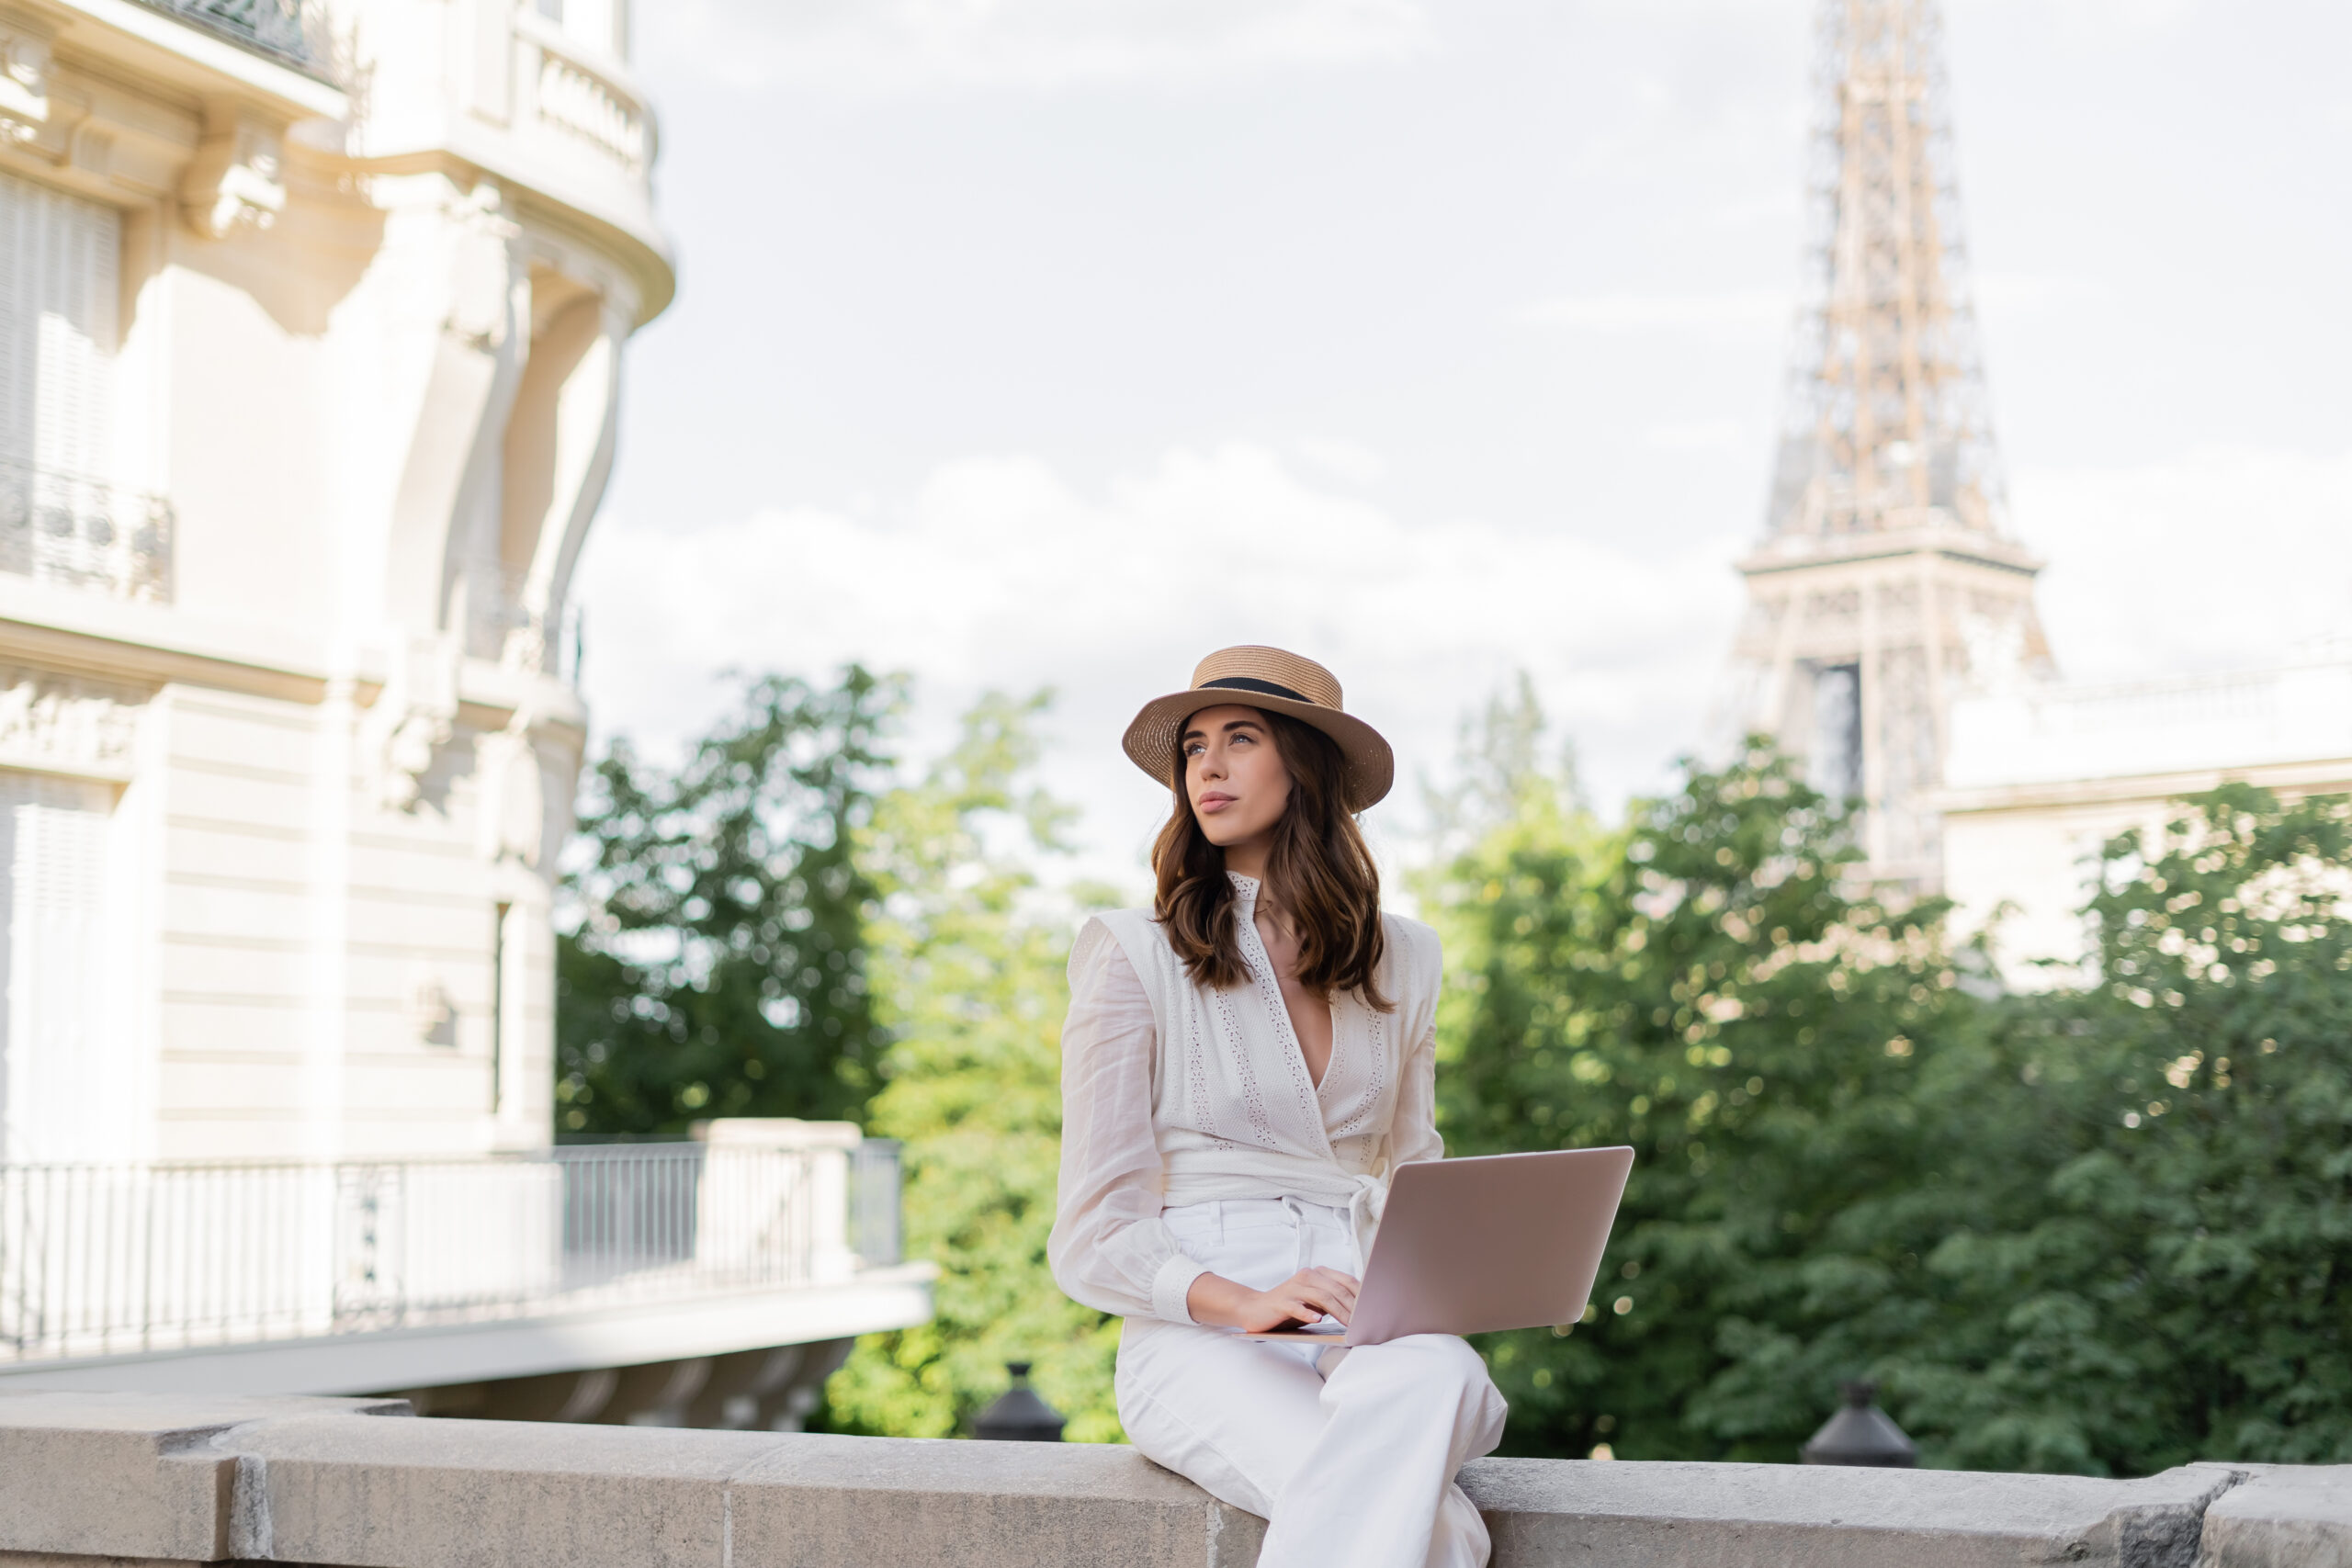 stylish professional woman working on a laptop outdoor with eiffel tower in the background